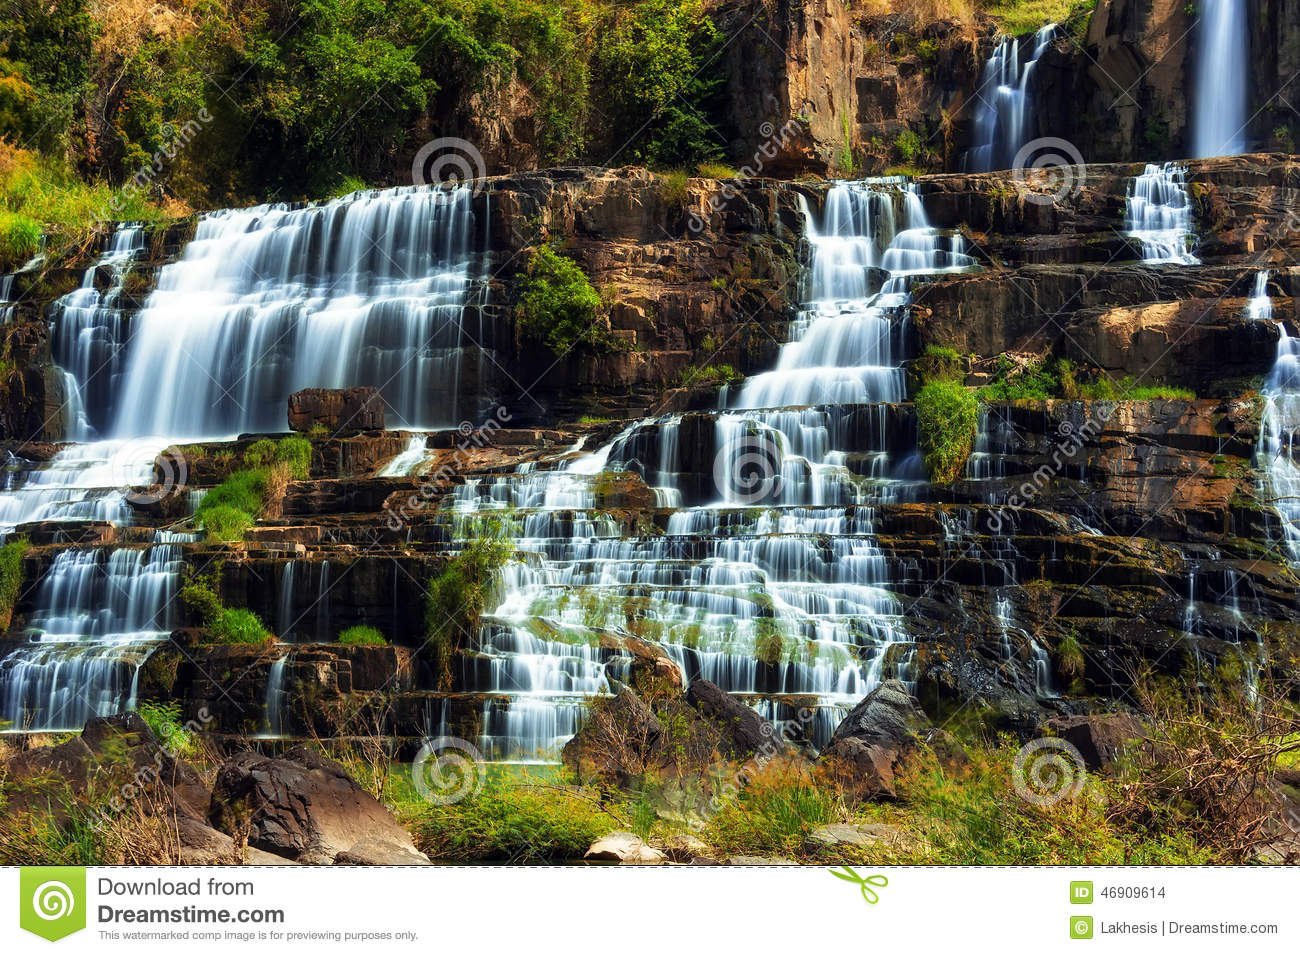 Pongour Waterfall clipart #3, Download drawings